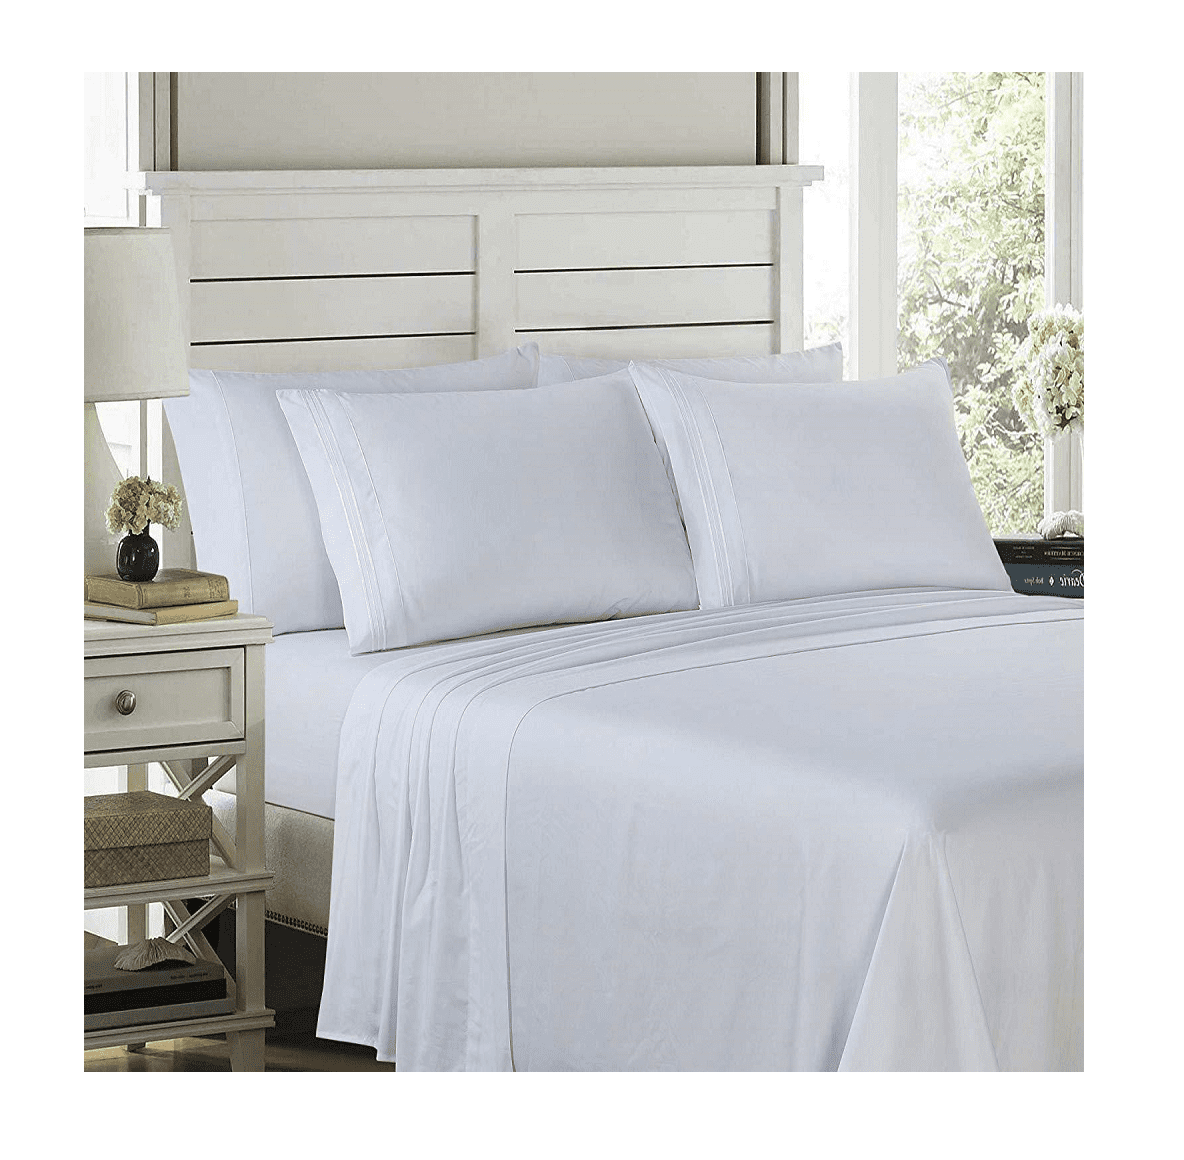 Luxury Hotel Quality Duvet Cover Set or Flat Fitted Sheet T800 Egyptian Cotton 